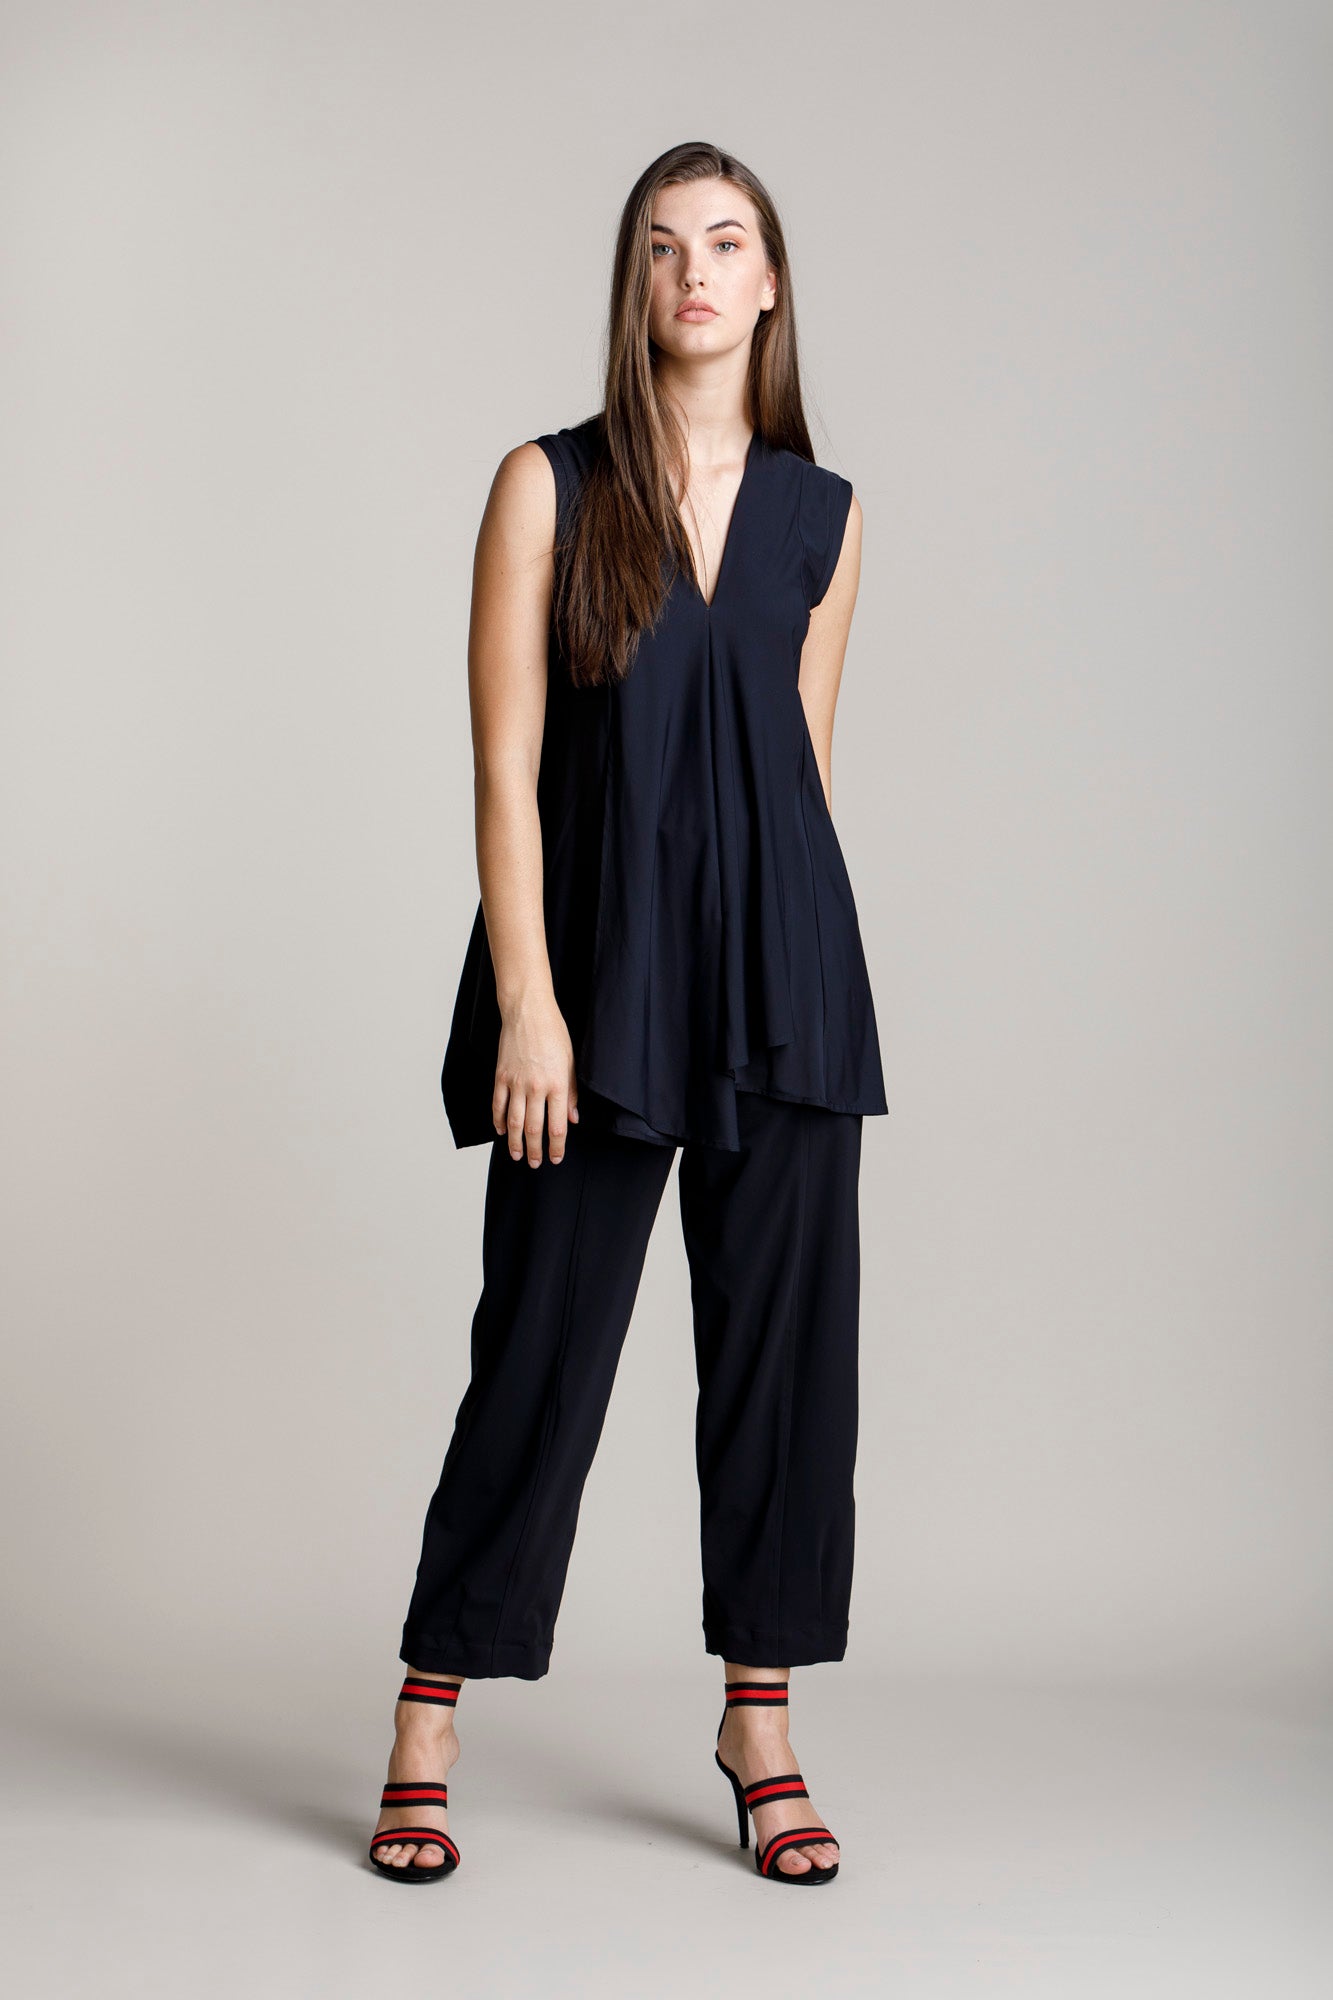 Black jersey hip pocket pant with a wide leg and cropped length, Australian made